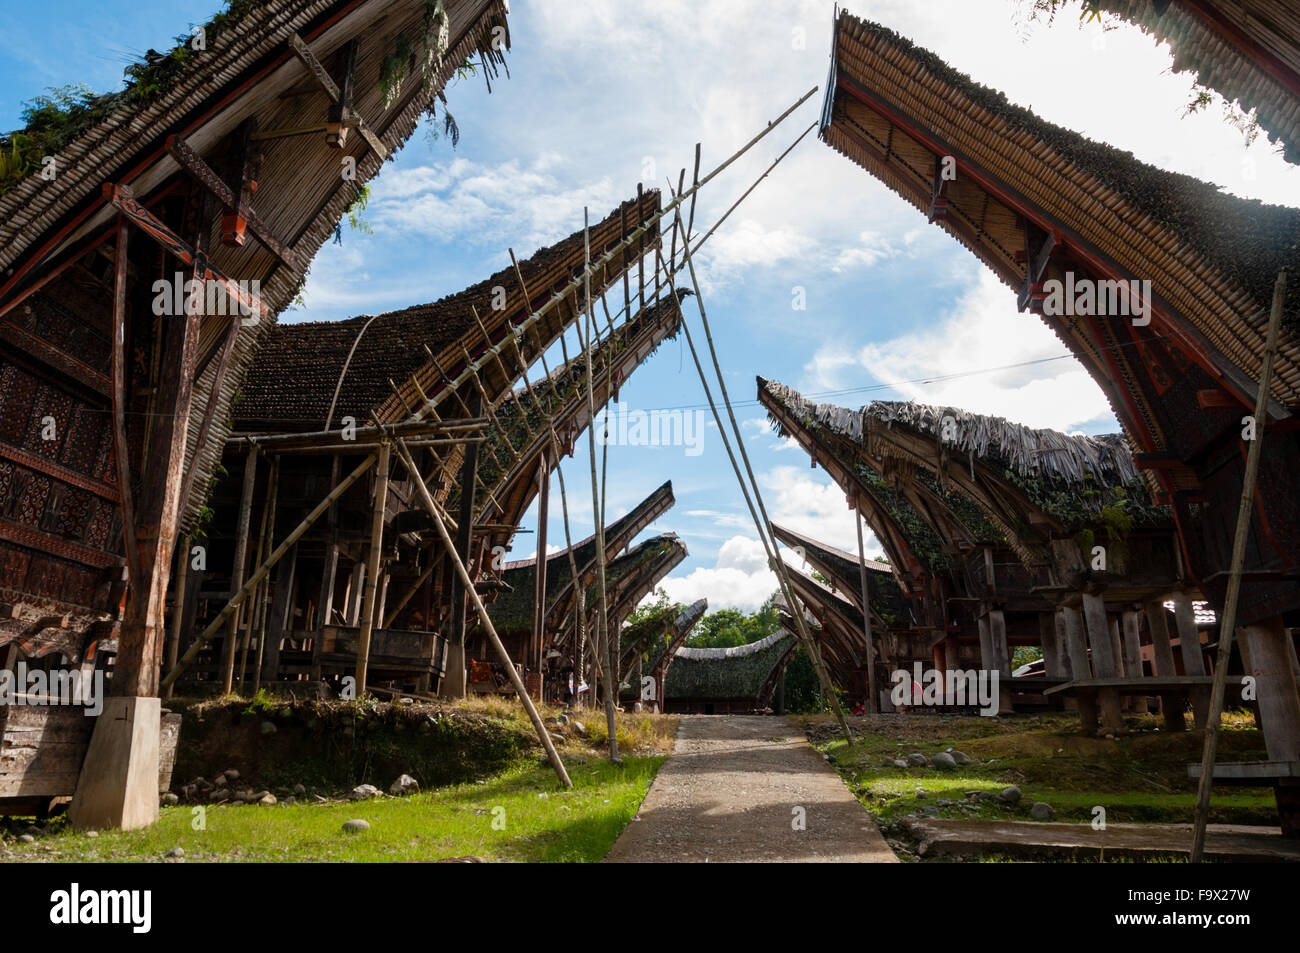 Native and Traditional Houses of Tana Toraja in Sulawesi Stock Photo